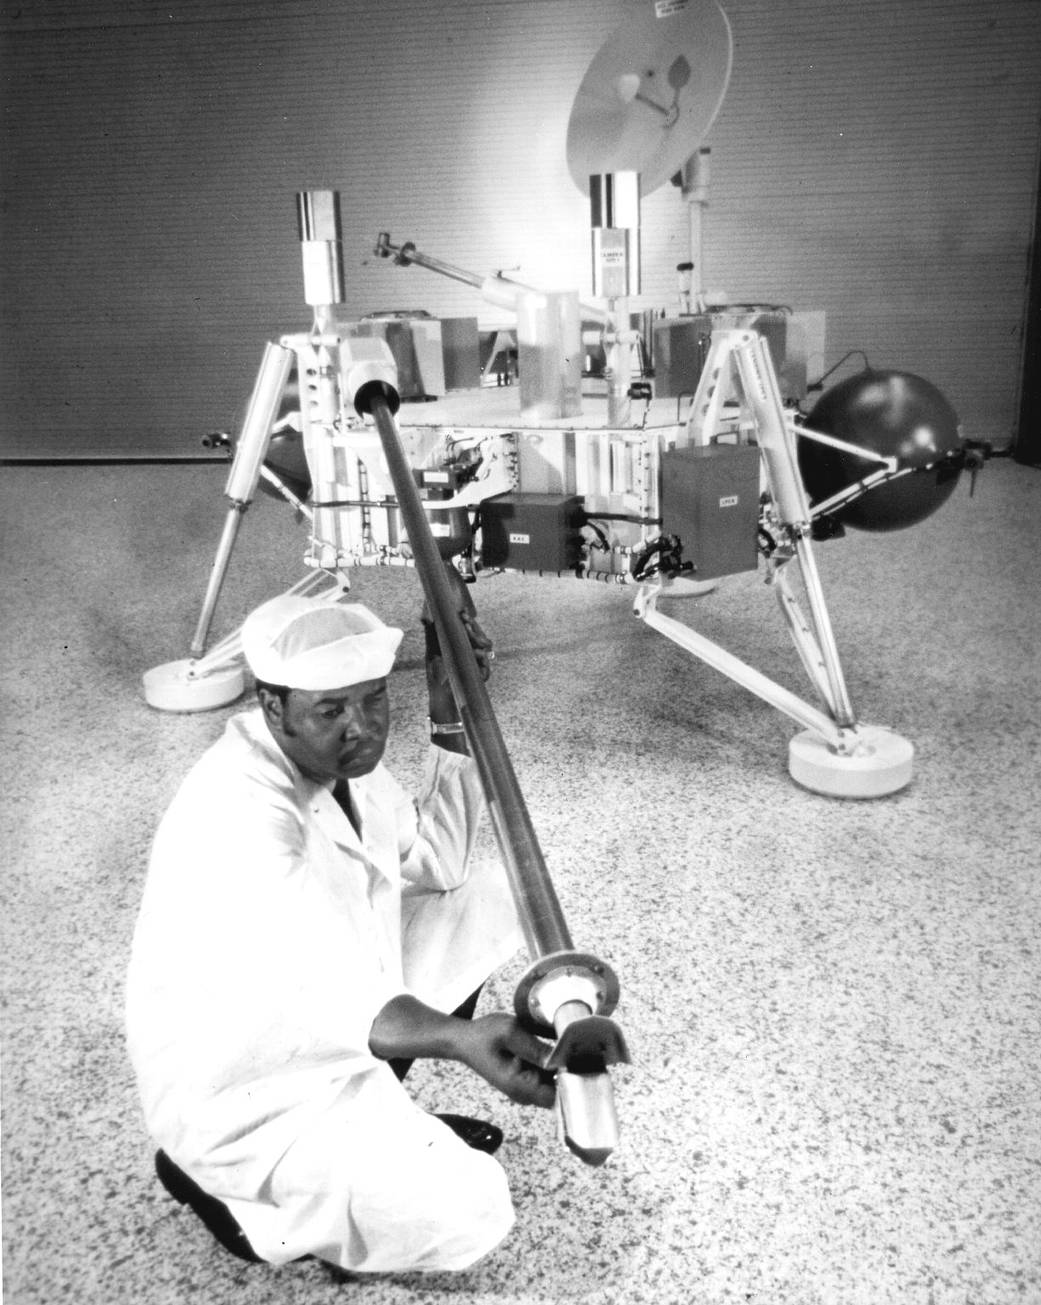 Viking lander spacecraft on ground with technician in clean suit checking robotic arm